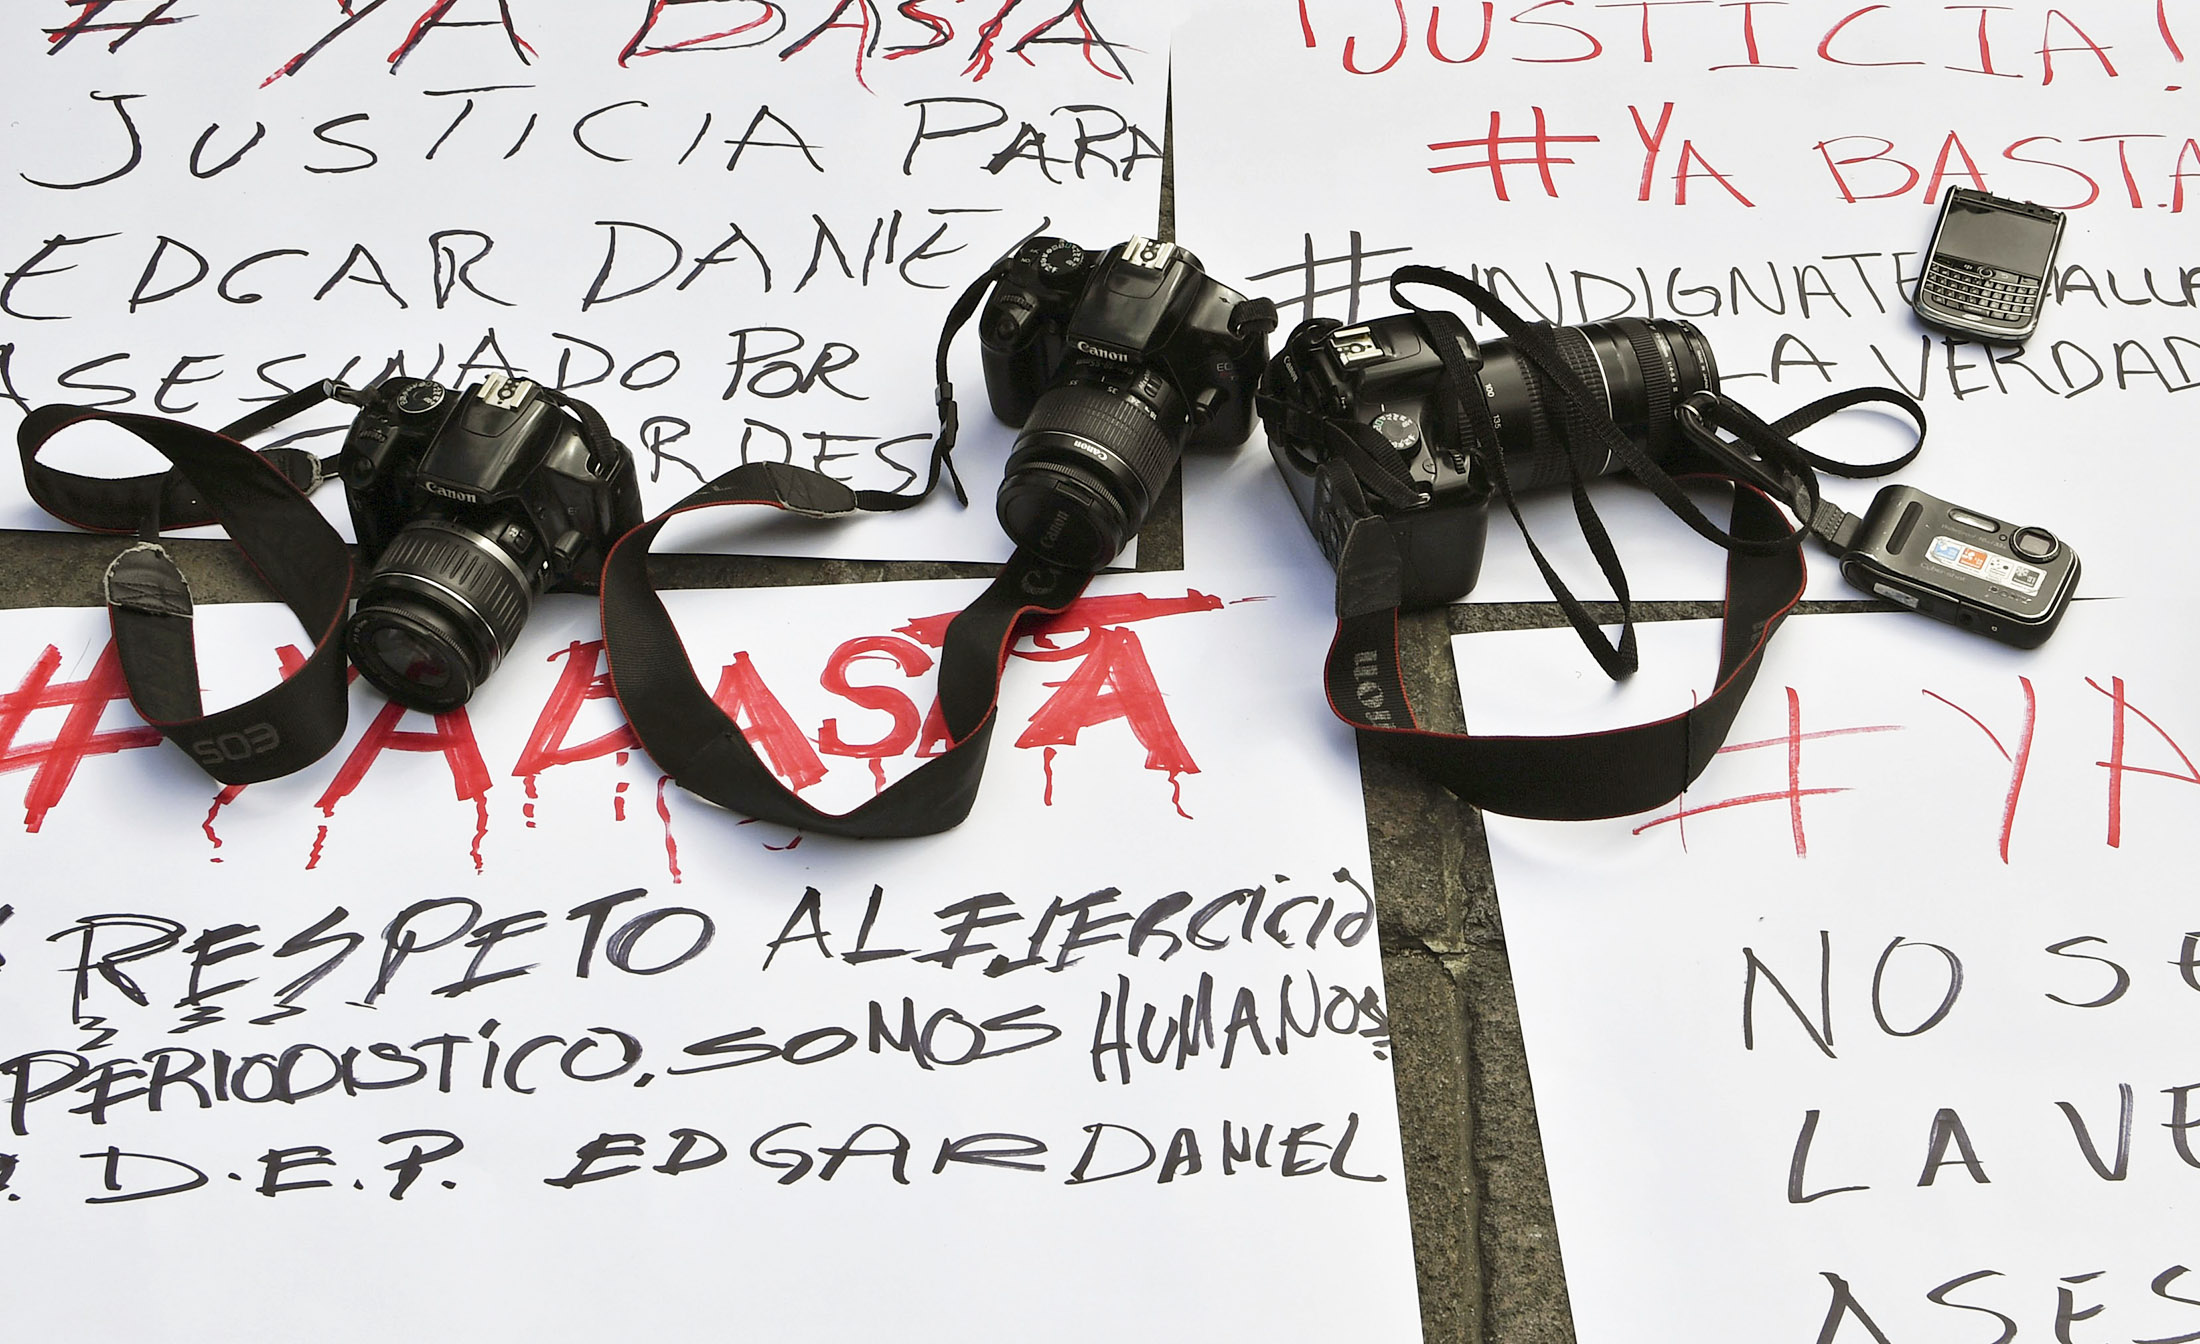 Cameras are placed on banners with messages of protest during a demonstration by photojournalists to demand justice for slain Mexican collegue Edgar Daniel Castro in front of the government's palace in San Luis Potosi, Mexico on October 6, 2017. 
Castro was kidnapped from his house by gunmen and was found dead on Friday in San Luis Potosi. / AFP PHOTO / YURI CORTEZ        (Photo credit should read YURI CORTEZ/AFP/Getty Images)